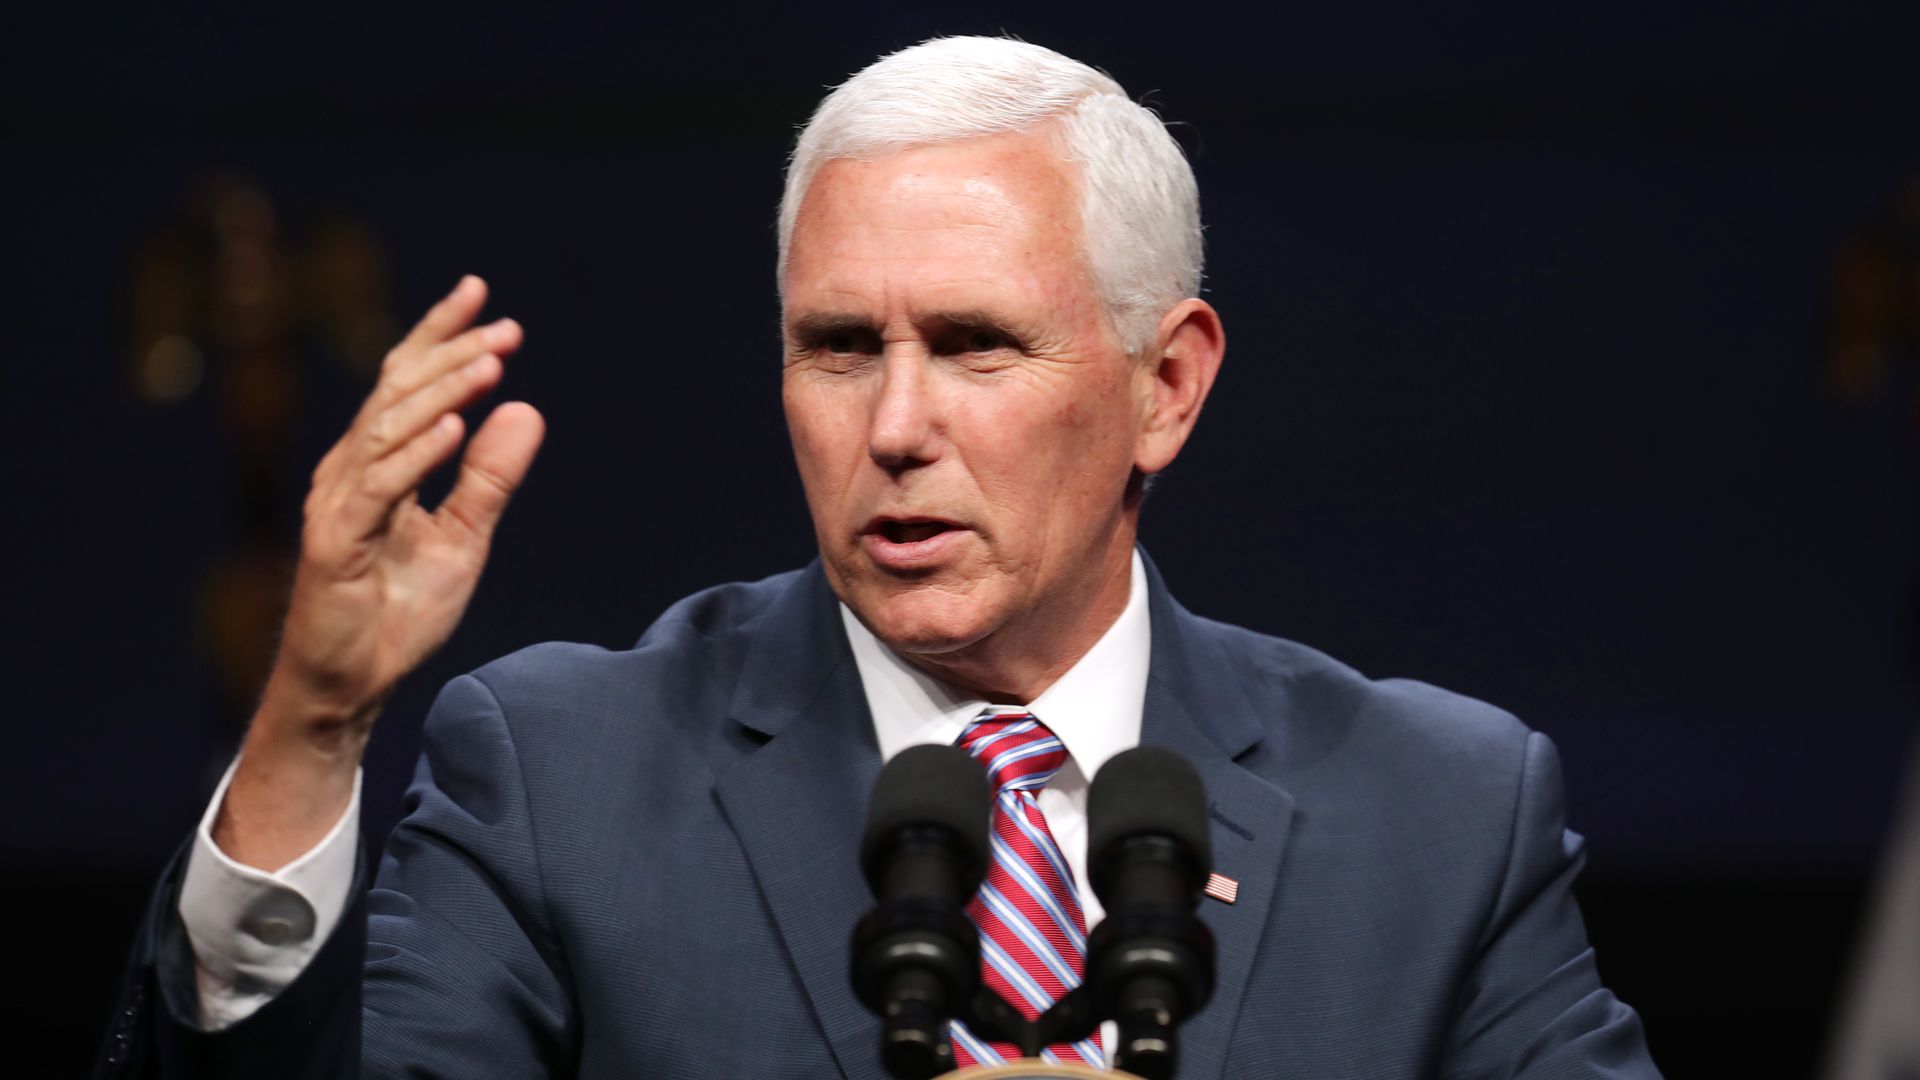 Vice President Mike Pence delivers a keynote address during Access Intelligence's Satellite 2019 Conference and Exhibition at the Walter E. Washington Convention Center in Washington, DC. 